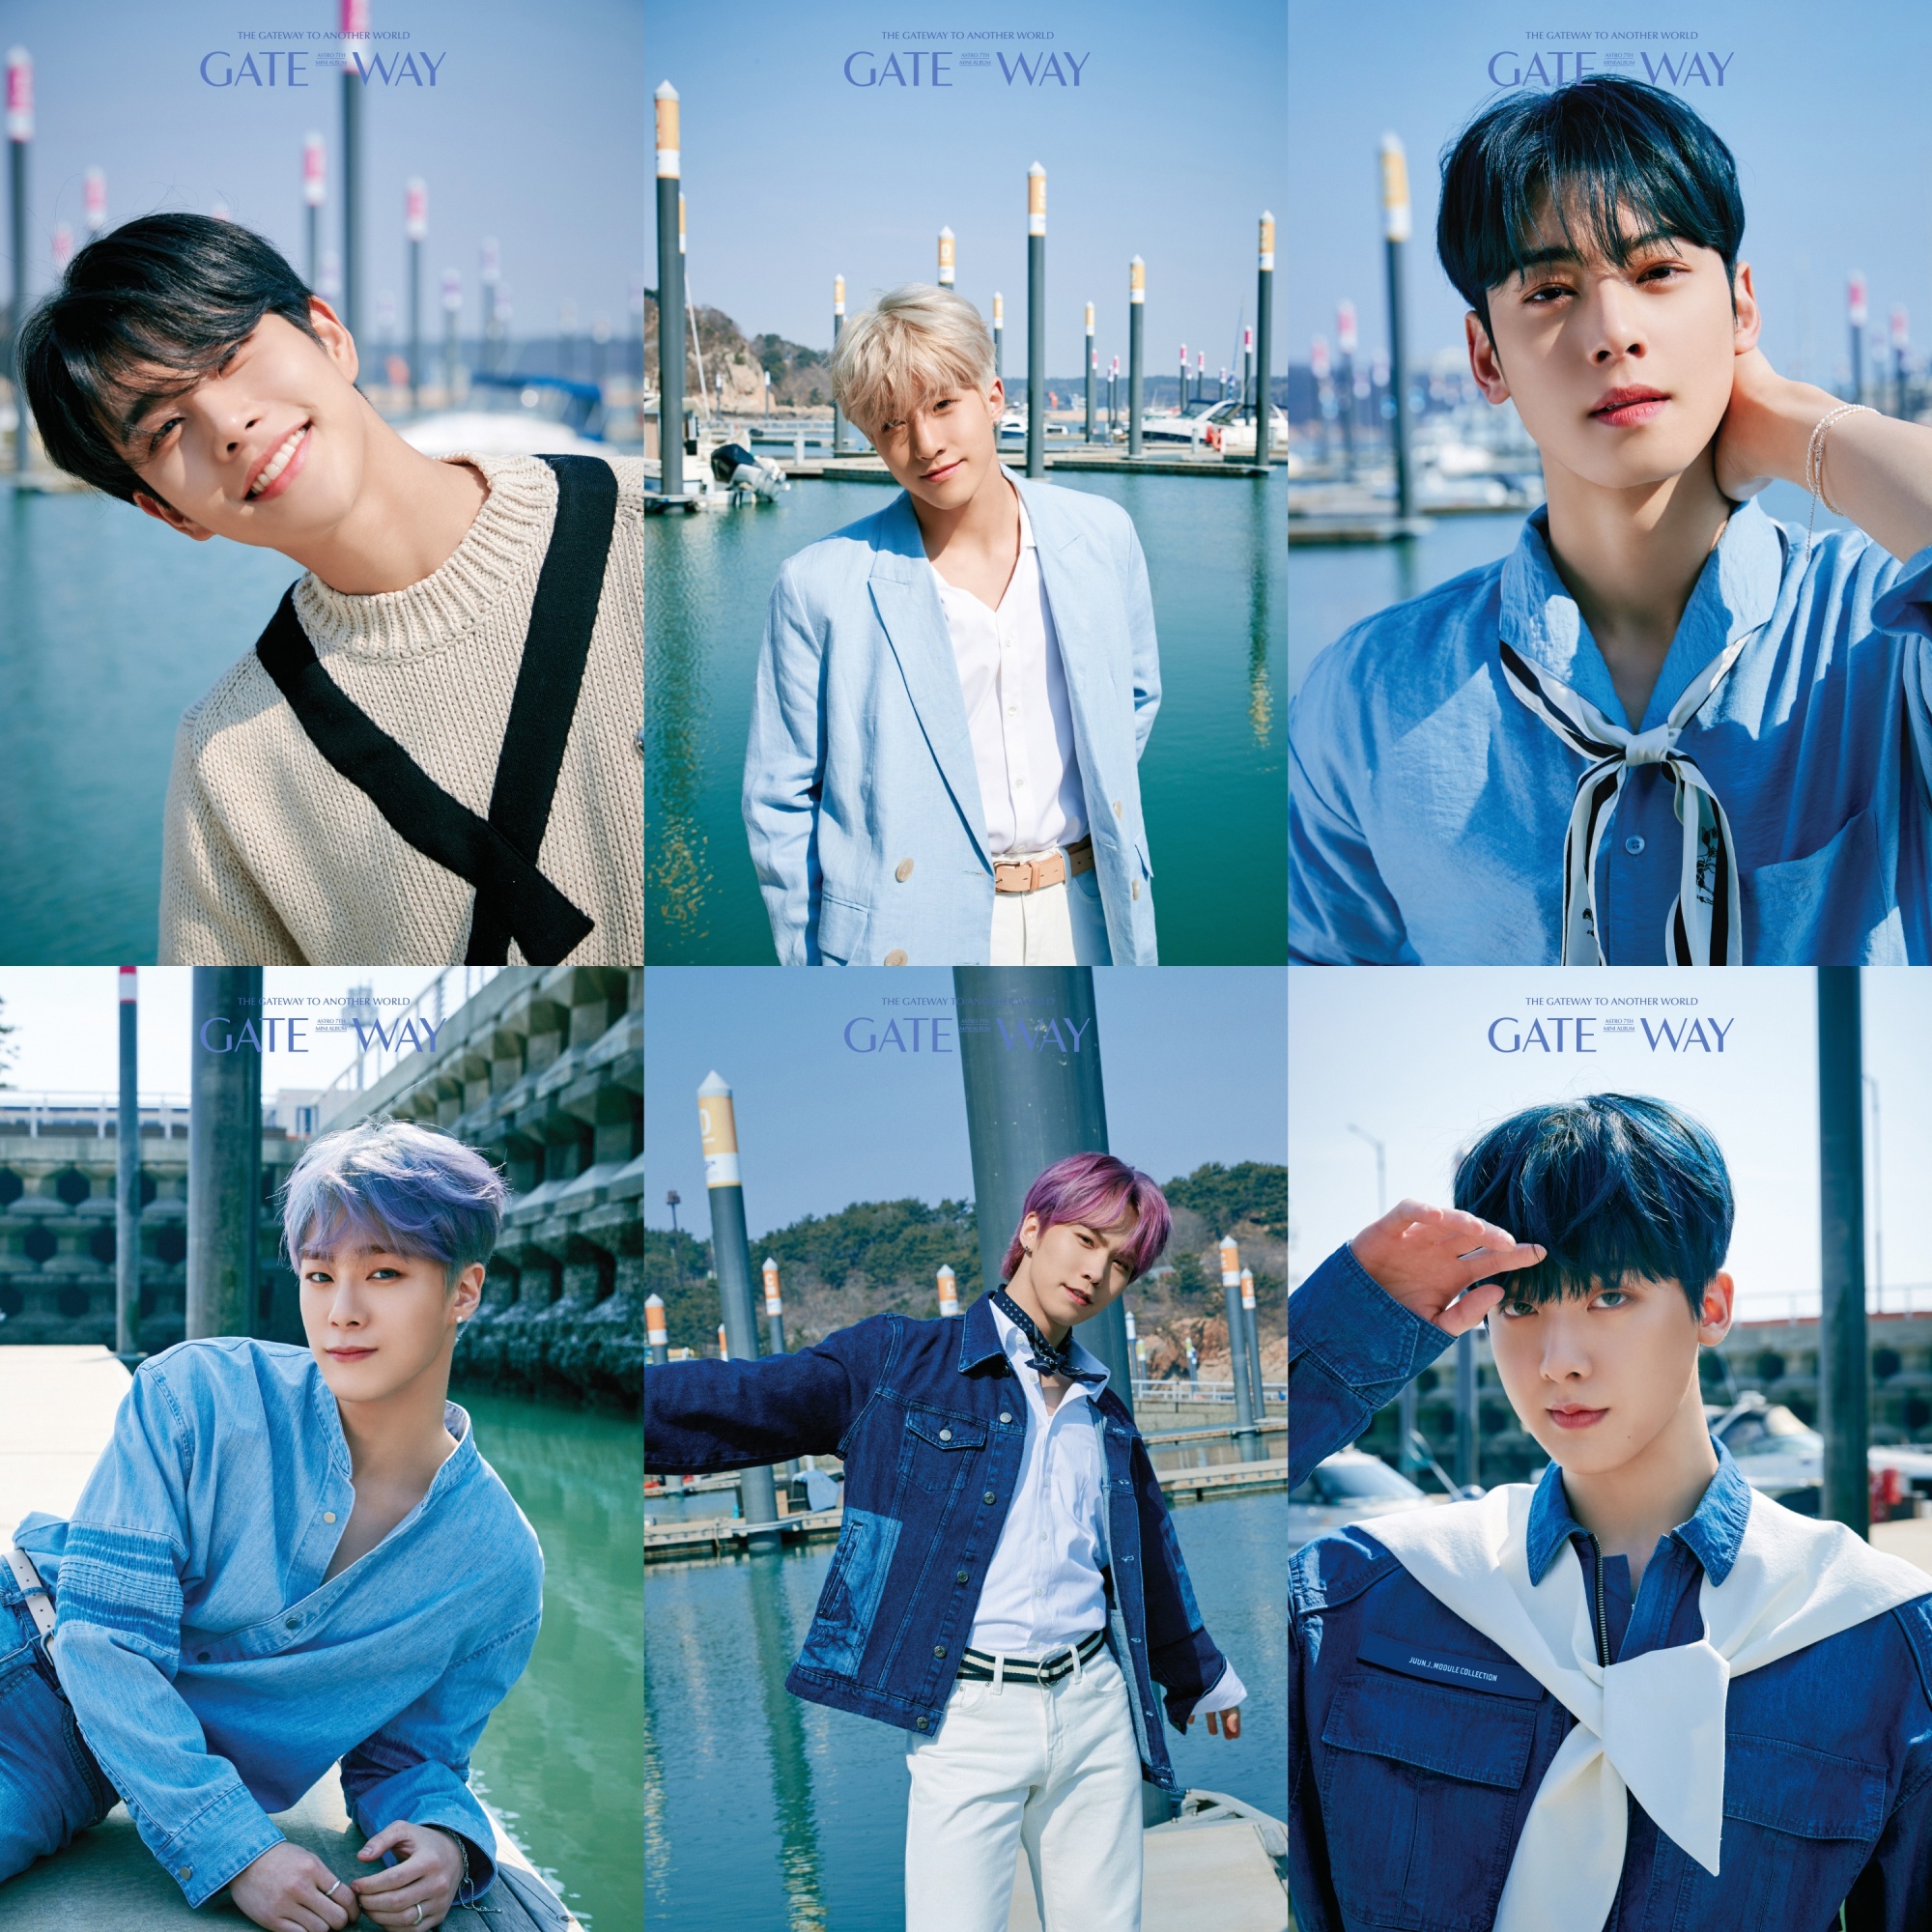 Astro (ASTRO) captivated Sight at once with its unique refreshing beauty.Astro in the official photo ANOTHER WORLD (Anader World) version of the seventh mini album GATEWAY (gateway) published on the official SNS channel of Astro (MJ, Chen Zhen, Cha Eun-woo, Moon Bin, Rocky, Yoon San-ha) is itself a clean.Astro, a costume with a white and blue color, creates a cool atmosphere that seems to sail on a yacht at any moment.Especially, Astro, which lightly spreads its head as if it feels the wind in the background of a picture-like blue sky and the sea, feels luxurious refreshment.In addition, it has completed a more refreshing Astro in contrast to the previously released TIME TRAVELER concept.Above all, Farm Synergy, which is created by six Astro members, raises expectations for this album GATEWAY, which predicts Power refreshment.In addition, Astro has shown both desolation of the desert and cleanness of the sea through official photo, so I am curious about the story to be included in the album.Meanwhile, Astros seventh mini album GATEWAY will be released at 6 pm on May 4th as an album that can fully feel the charm of Power refreshment of Absolute Icon Astro.iMBC  Photo Fantasy O Music